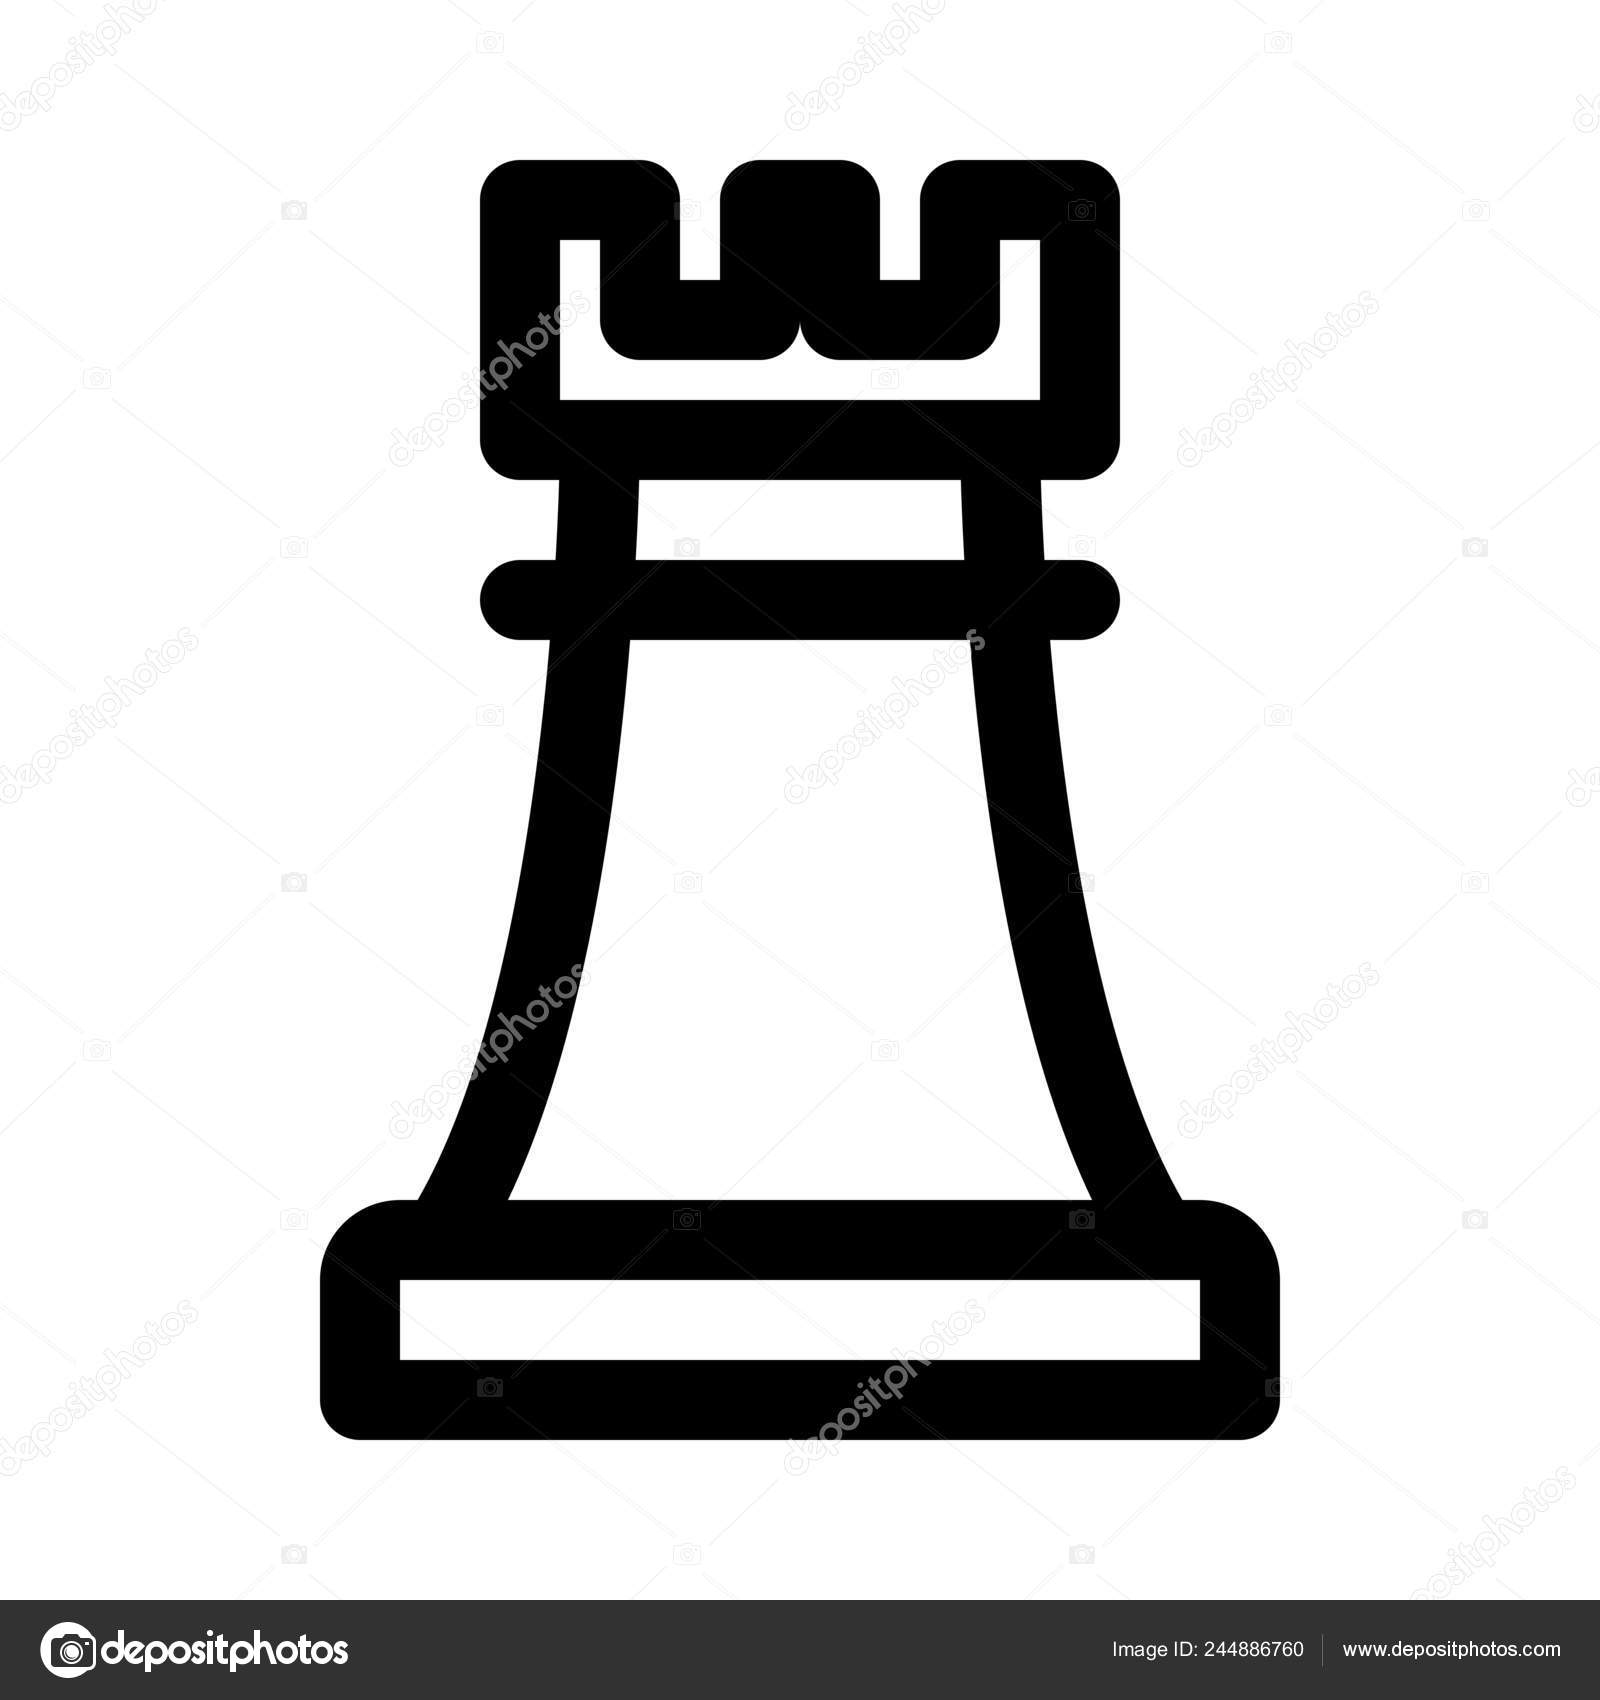 Chess Rook Vector Stock Illustrations – 8,546 Chess Rook Vector